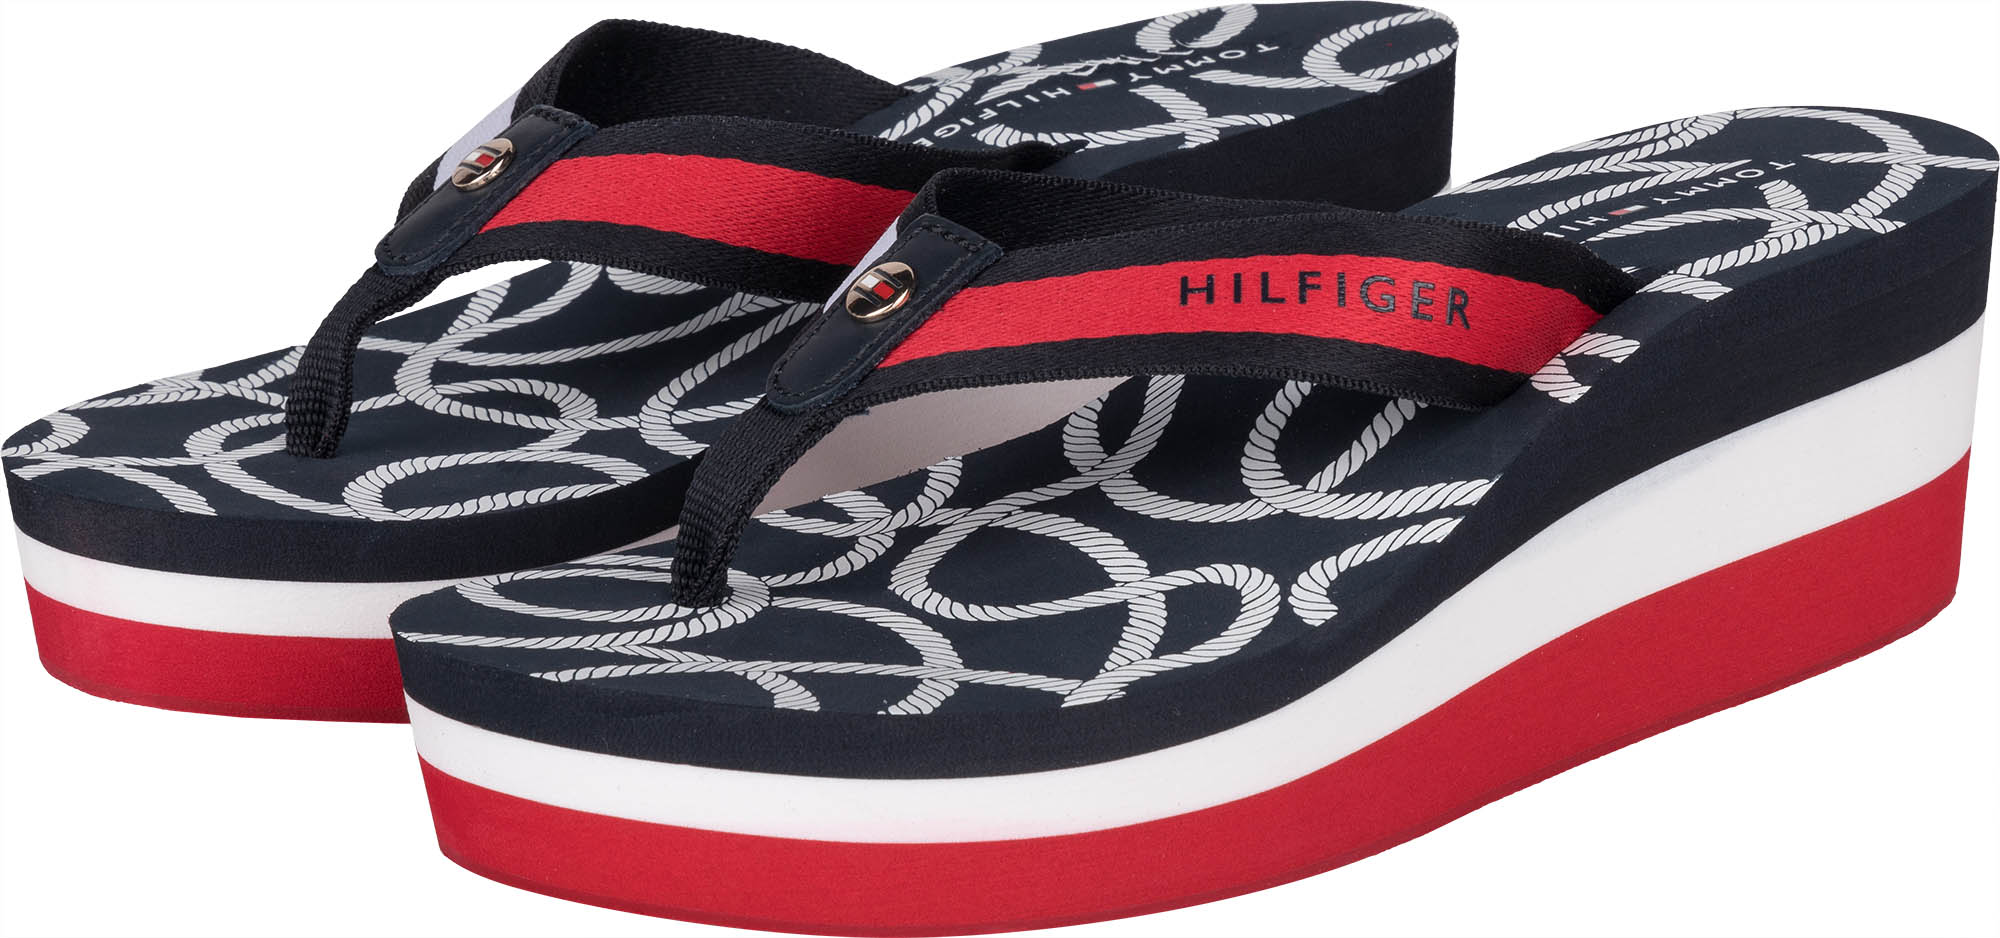 Bout Ouvert Femme Tommy Hilfiger Nautical High Wedge Beach Sandal